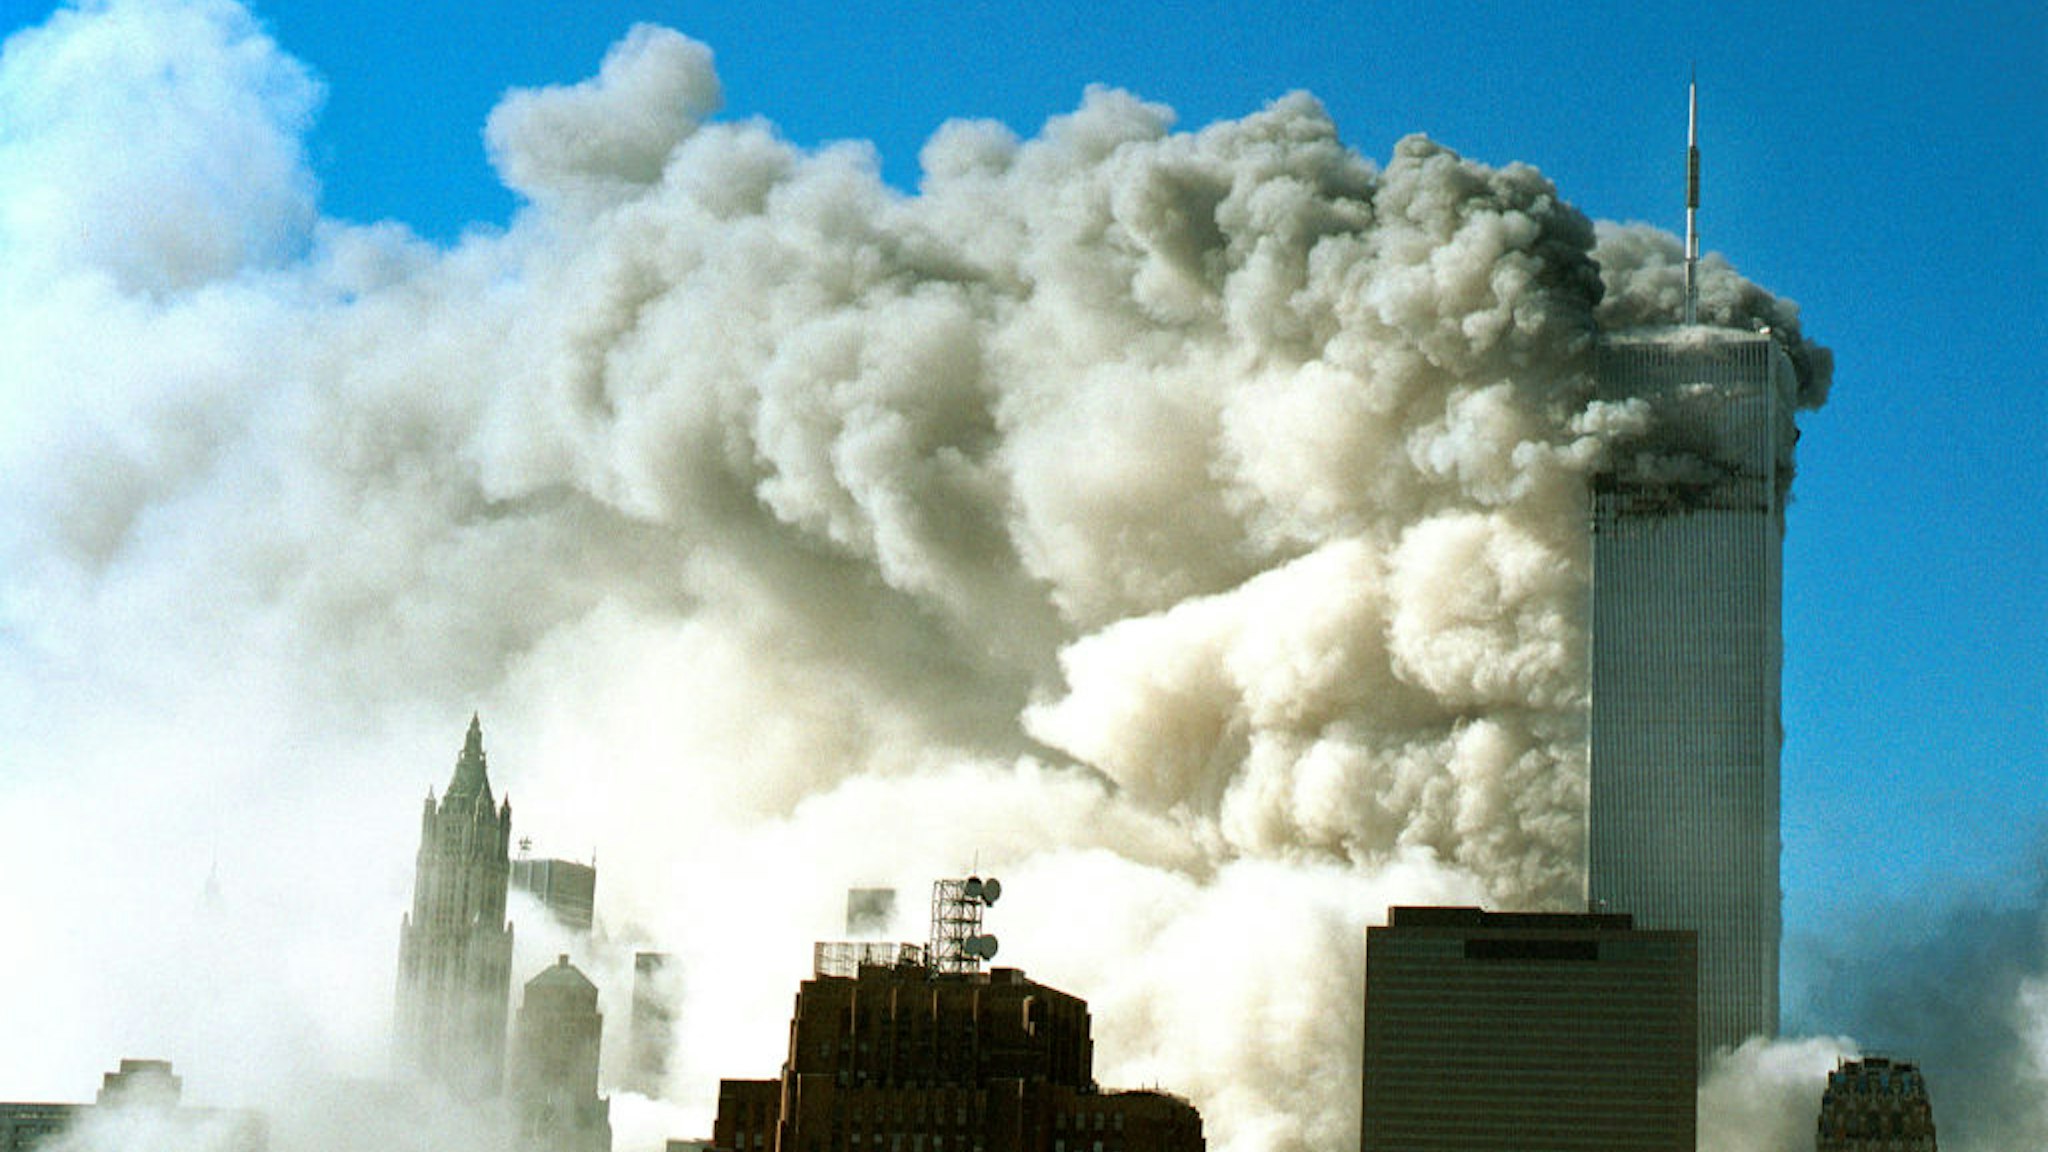 Smoke pours out of the World Trade Center after the twin towers were struck by two planes during a suspected terrorist attack September 11, 2001 in New York City.